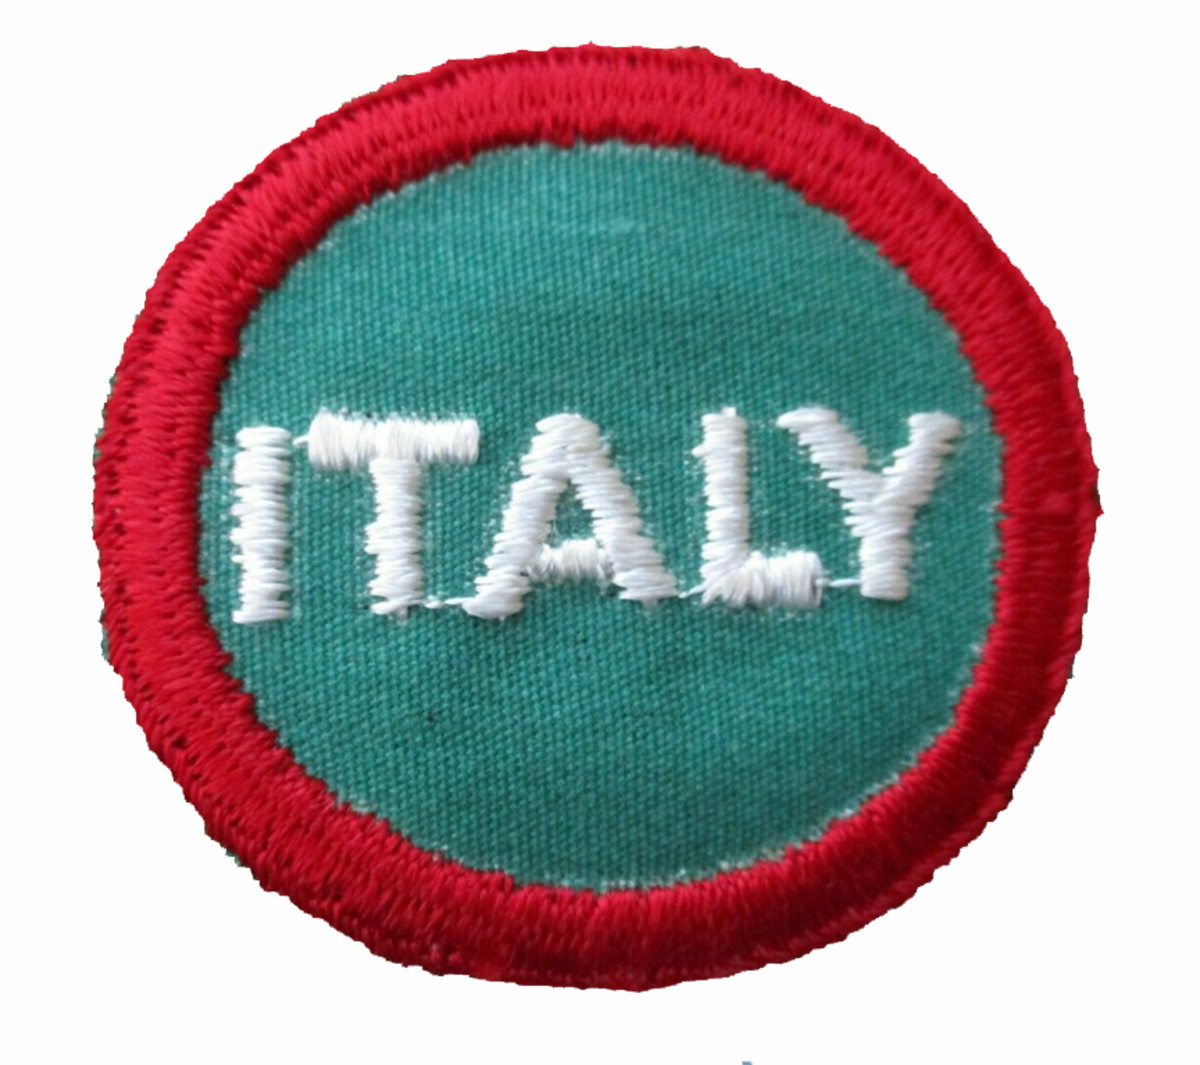 On the army overseas cap, the I.S.U. wore a circular patch two inches in diameter, bordered in bright red, with a dull green center in which ITALY appears in embroidered white letters, three-eighths inches high.